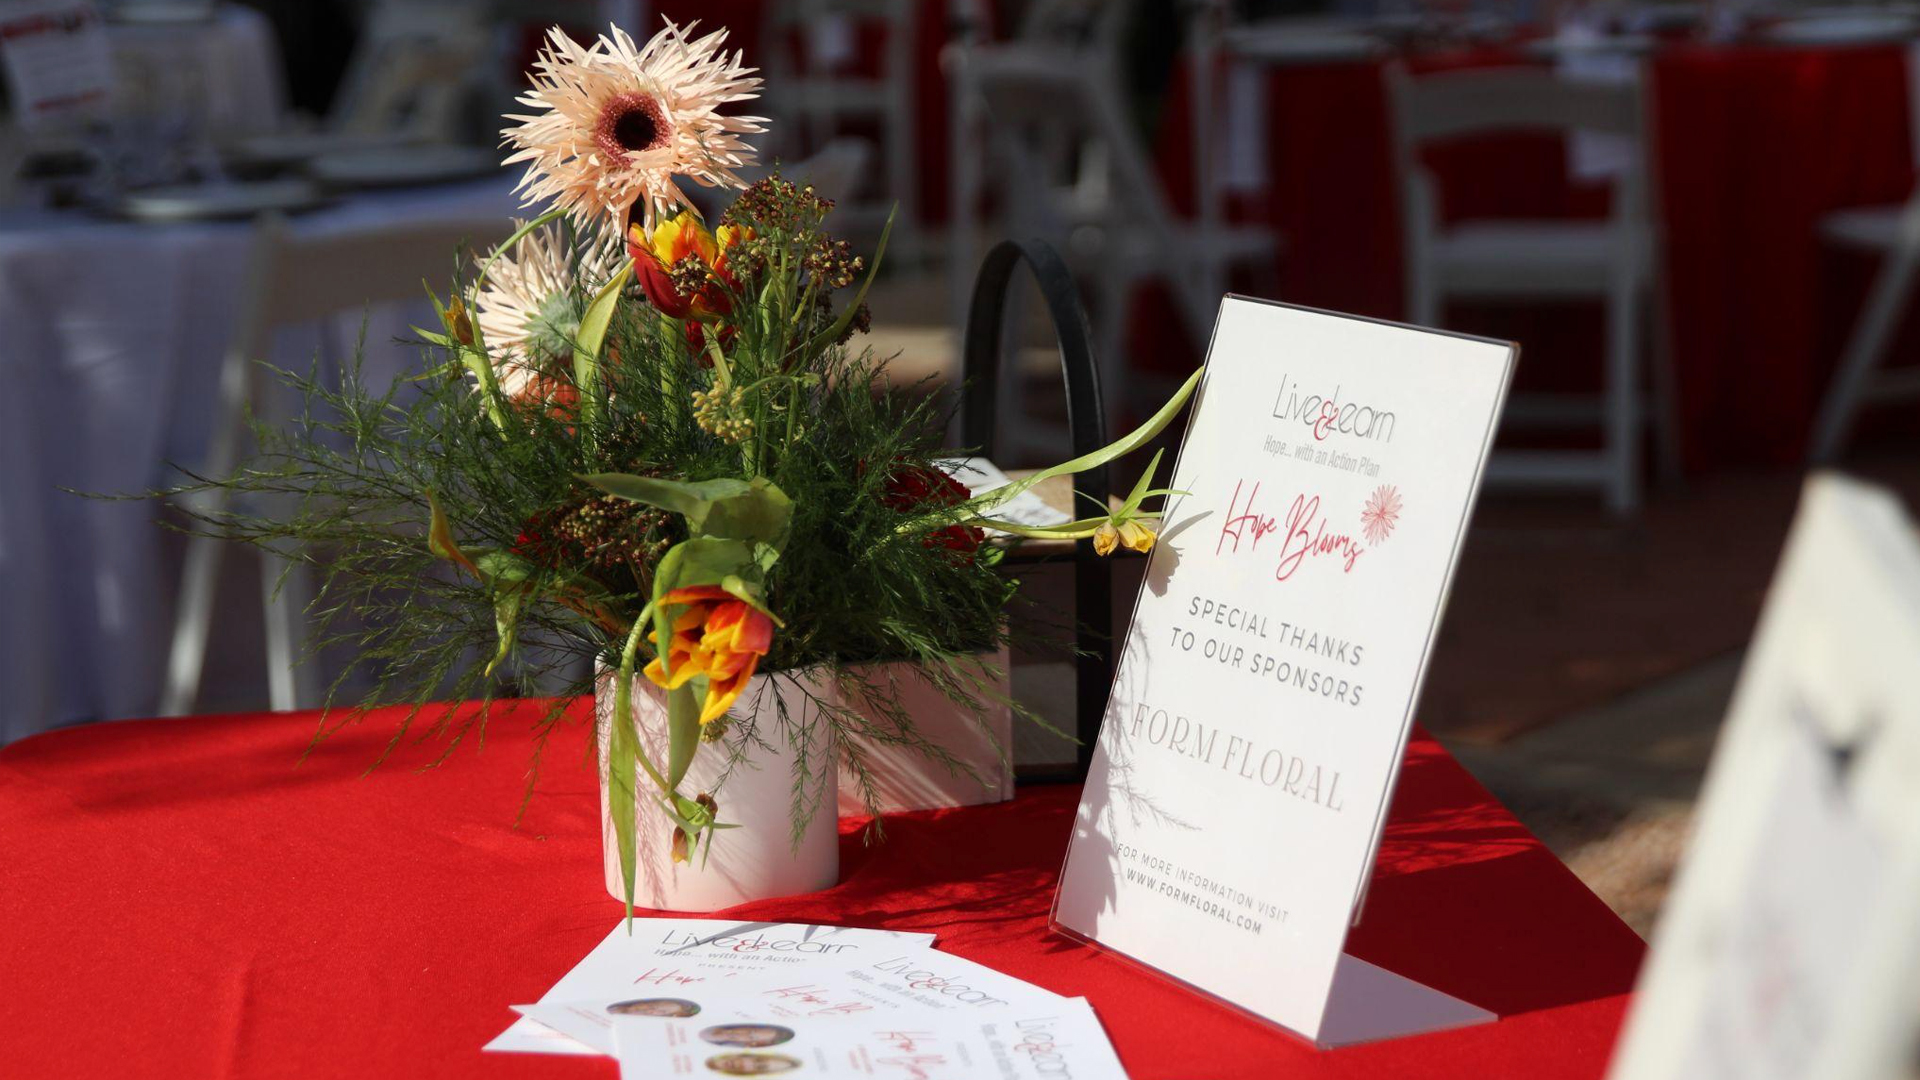 Live & Learn welcomed 62 guests to the first annual Hope Blooms brunch in March. All flowers were donated courtesy of Form Florals located at The Frederick on Missouri.